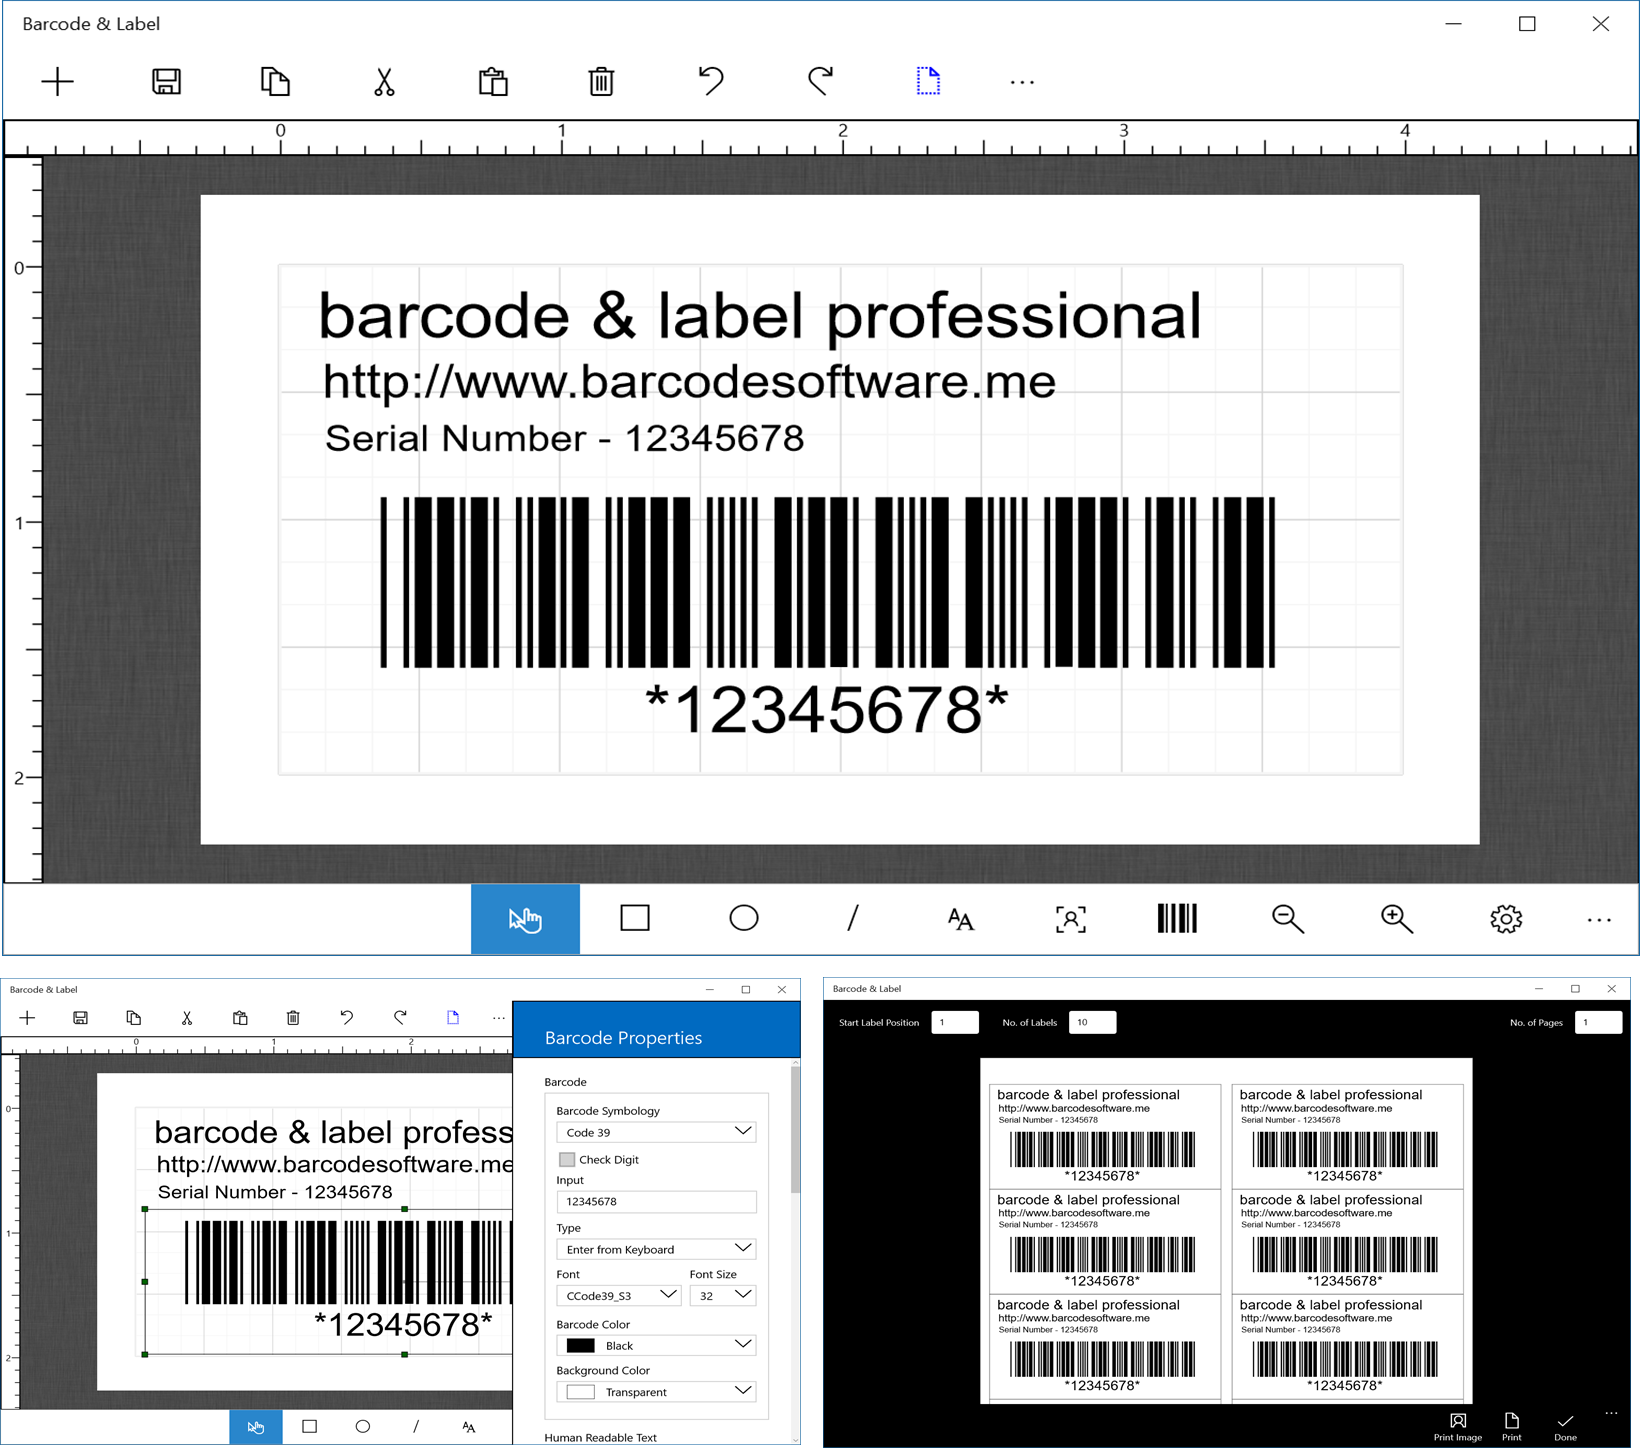 barcode inventory software freeware